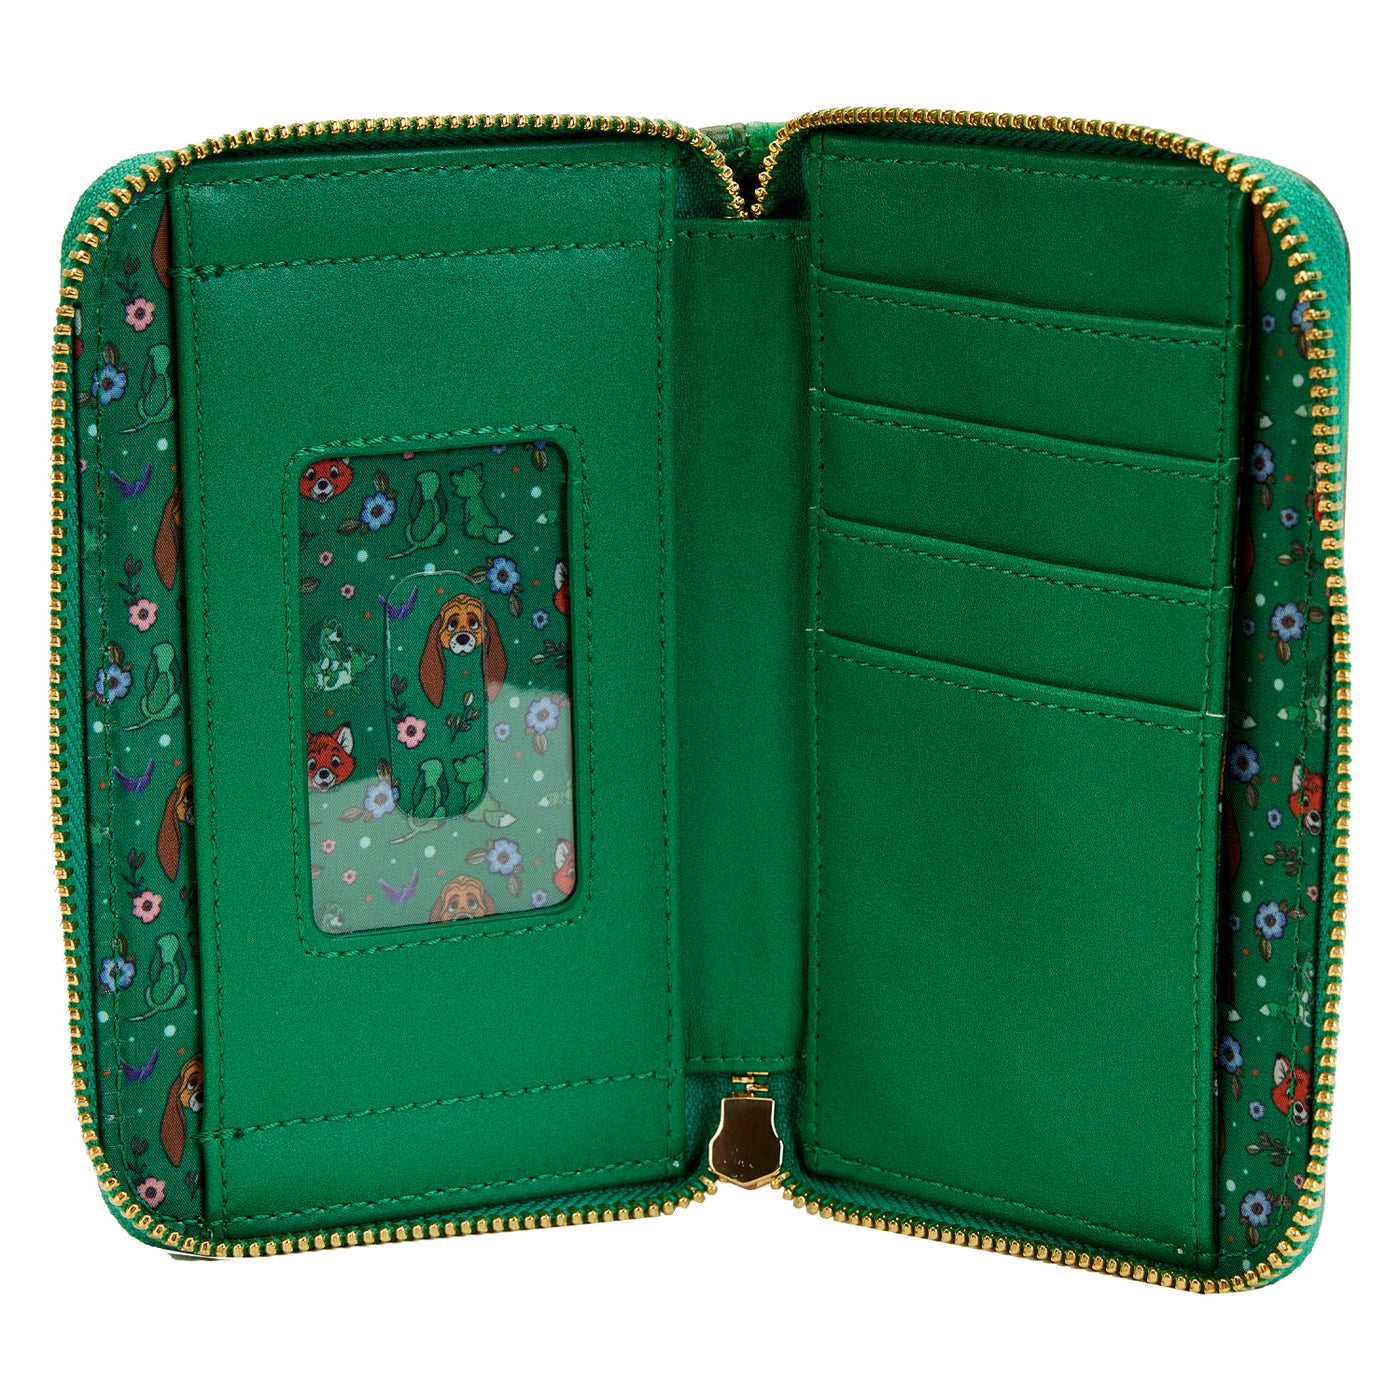 Disney Classic Books The Fox and the Hound Wallet